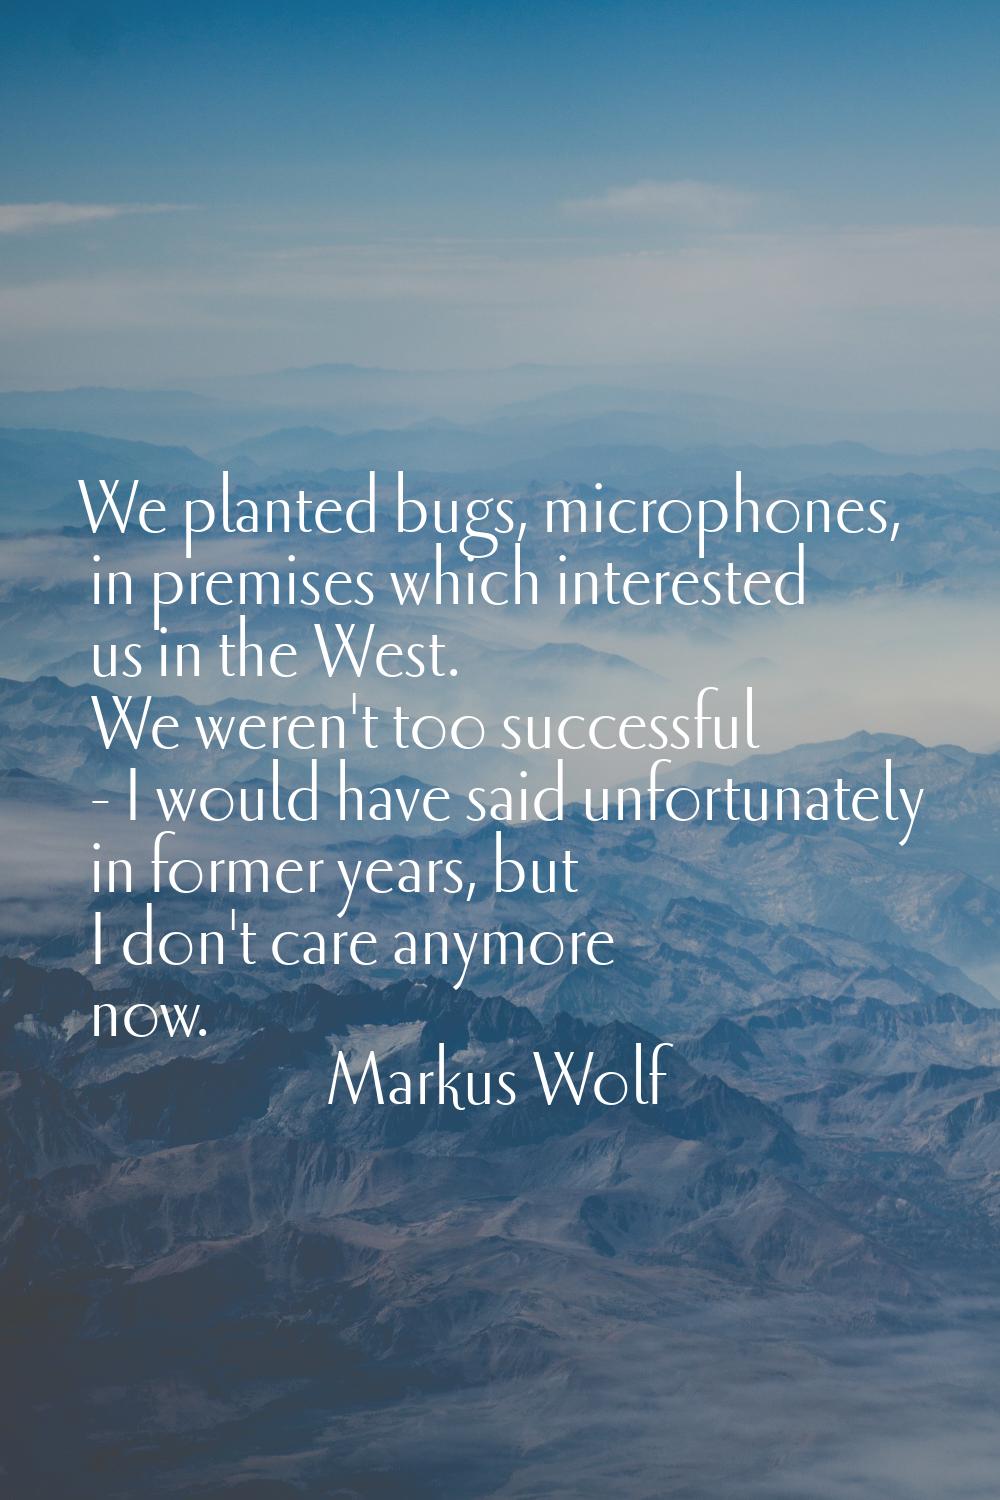 We planted bugs, microphones, in premises which interested us in the West. We weren't too successfu